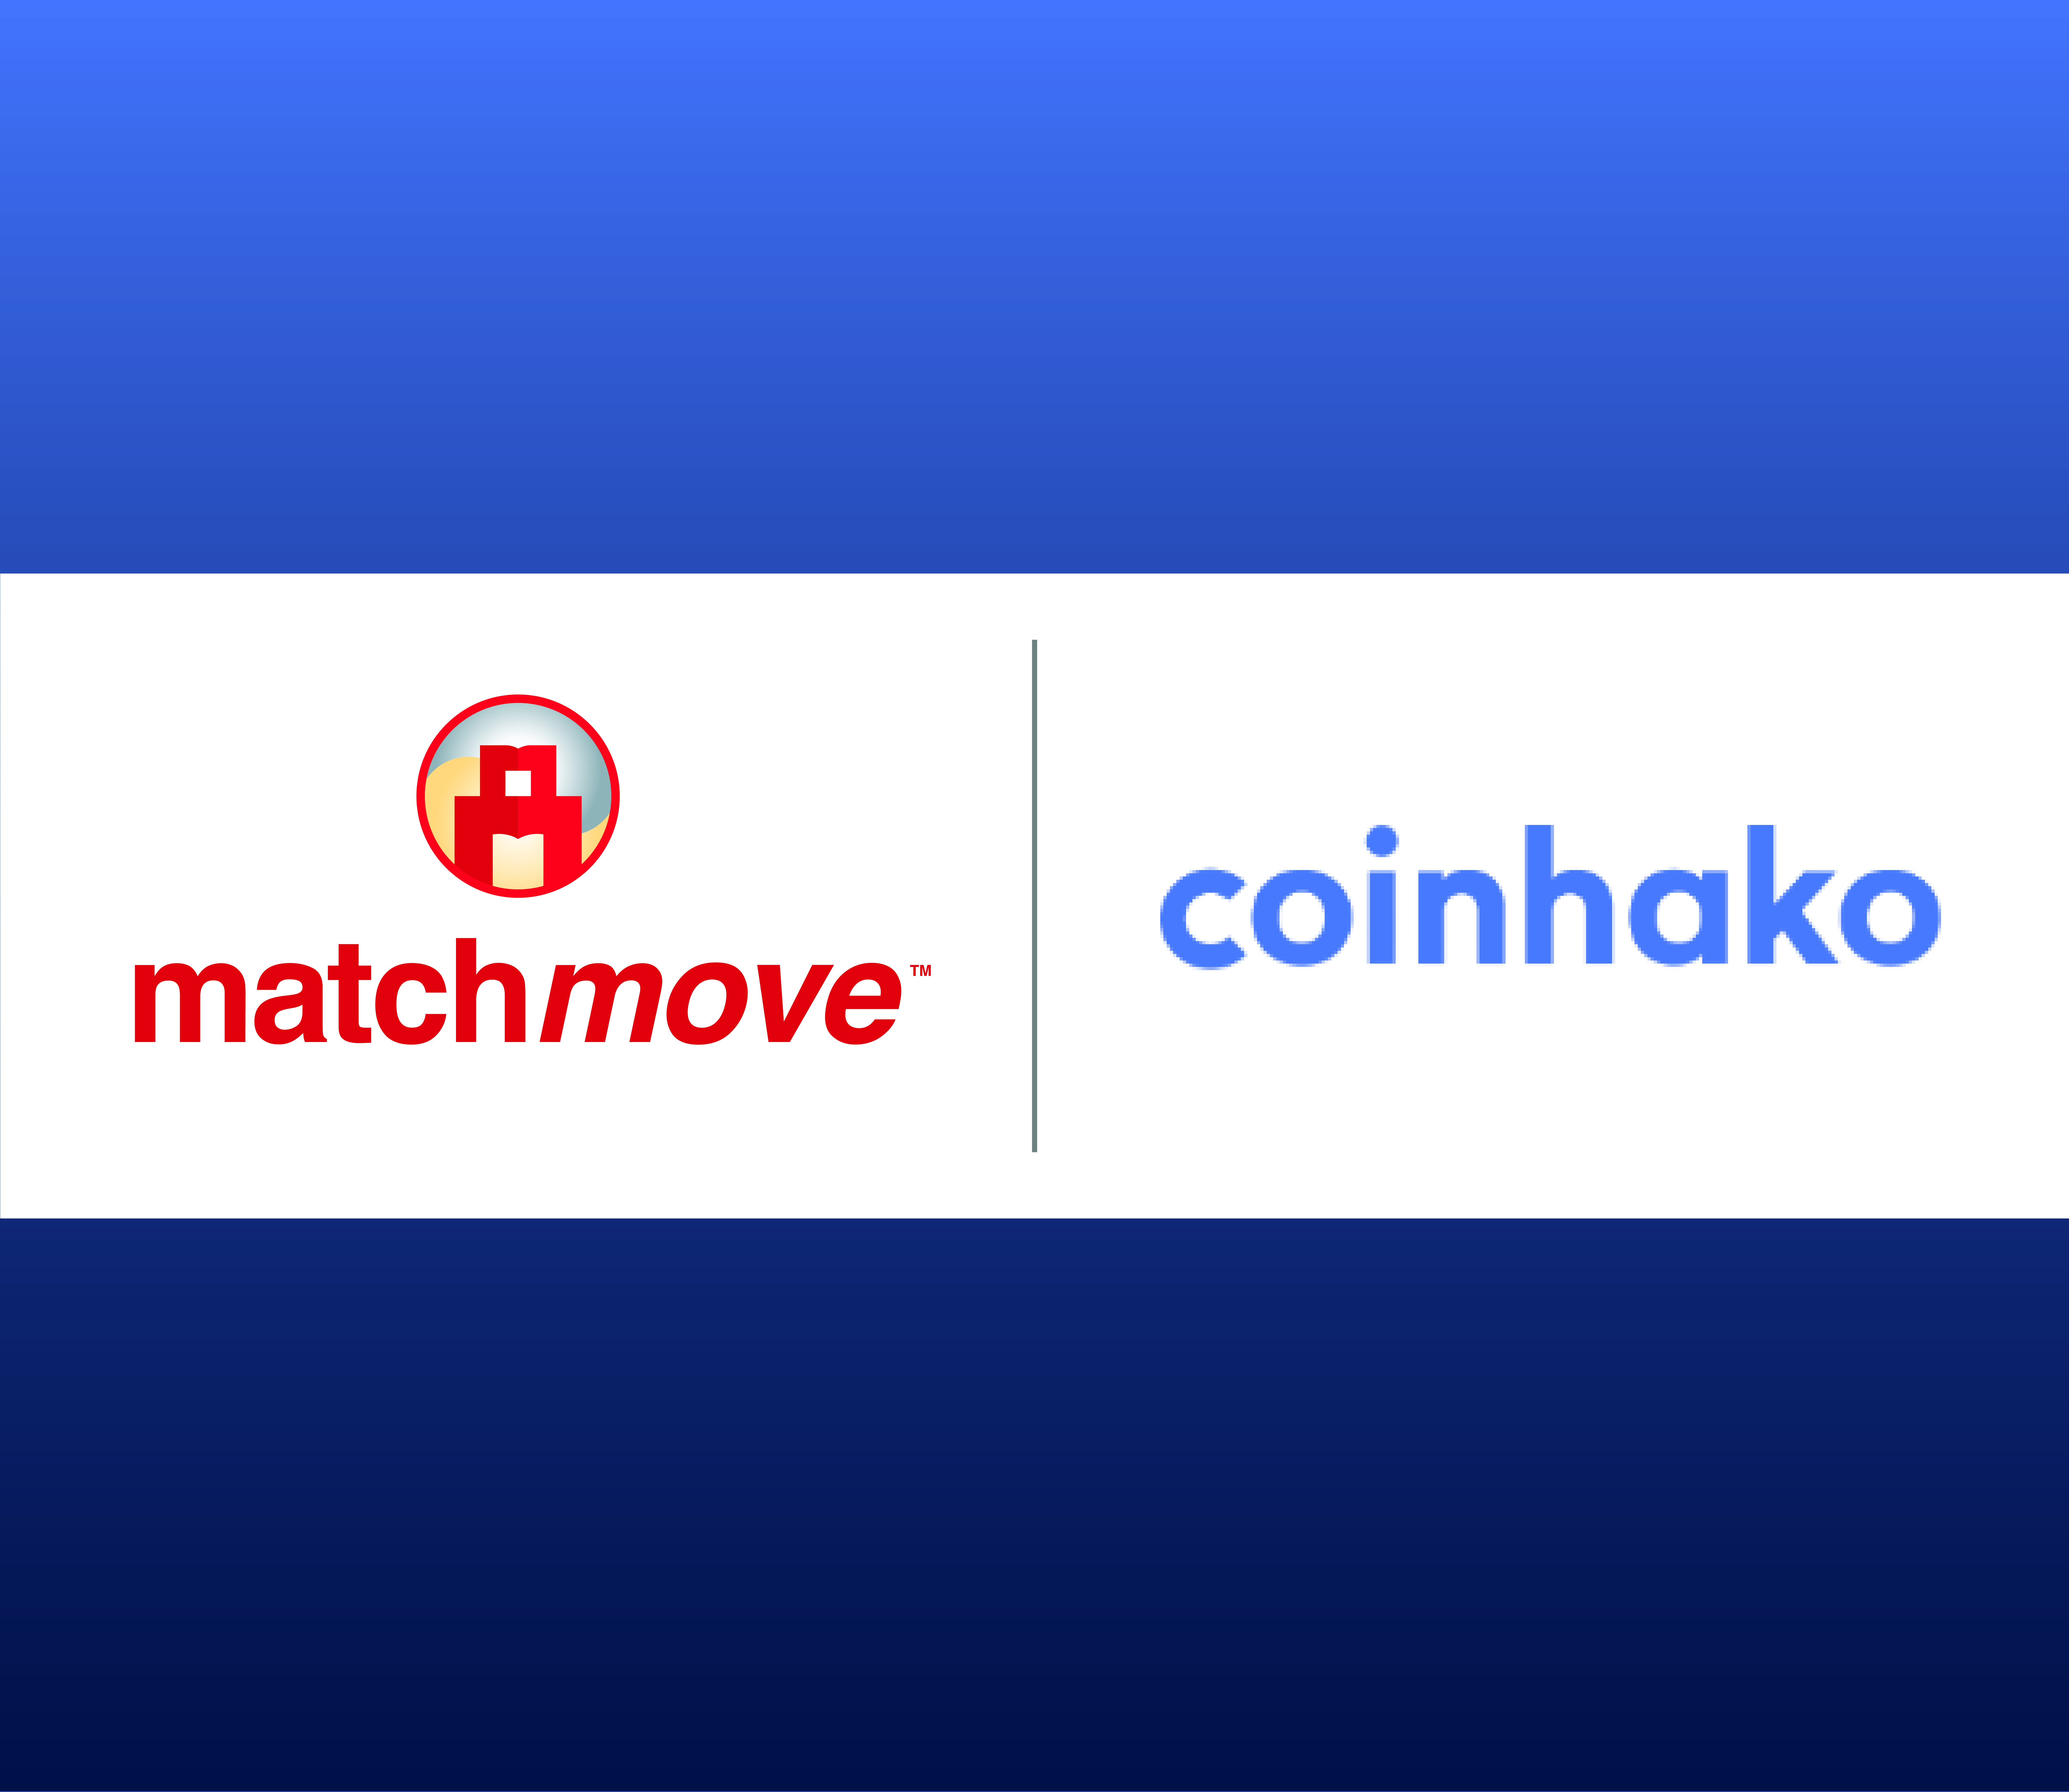 Coinhako selects MatchMove to power their customers’ ‘Superwallet’ with MoveFast collection and pay-out